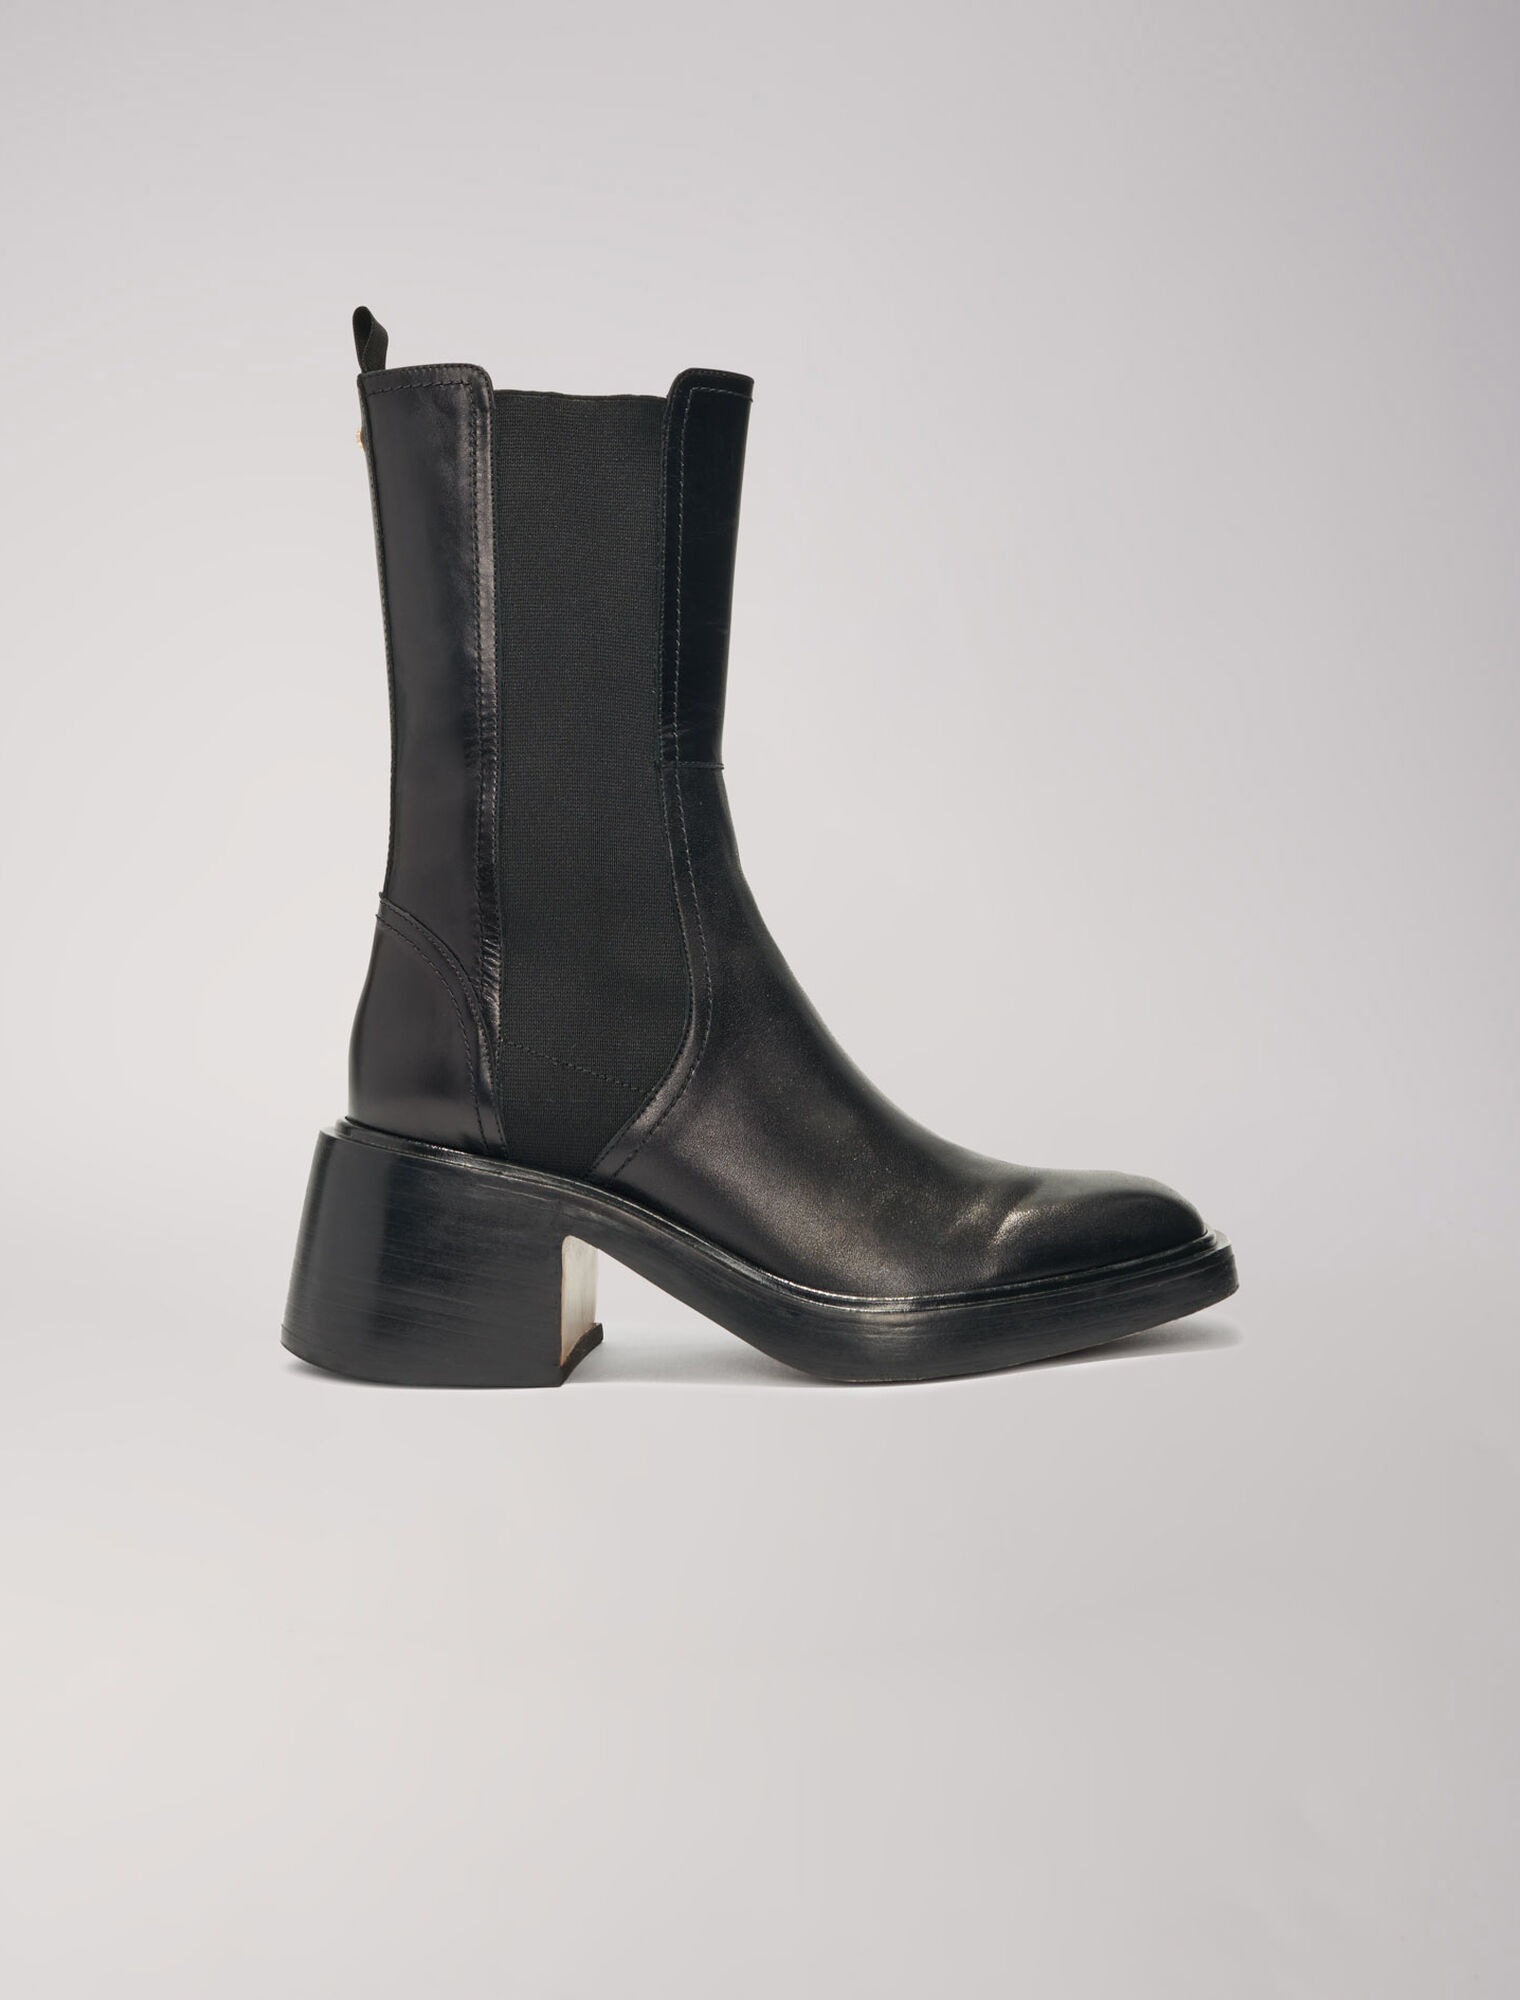 Black leather ankle boots and square toe